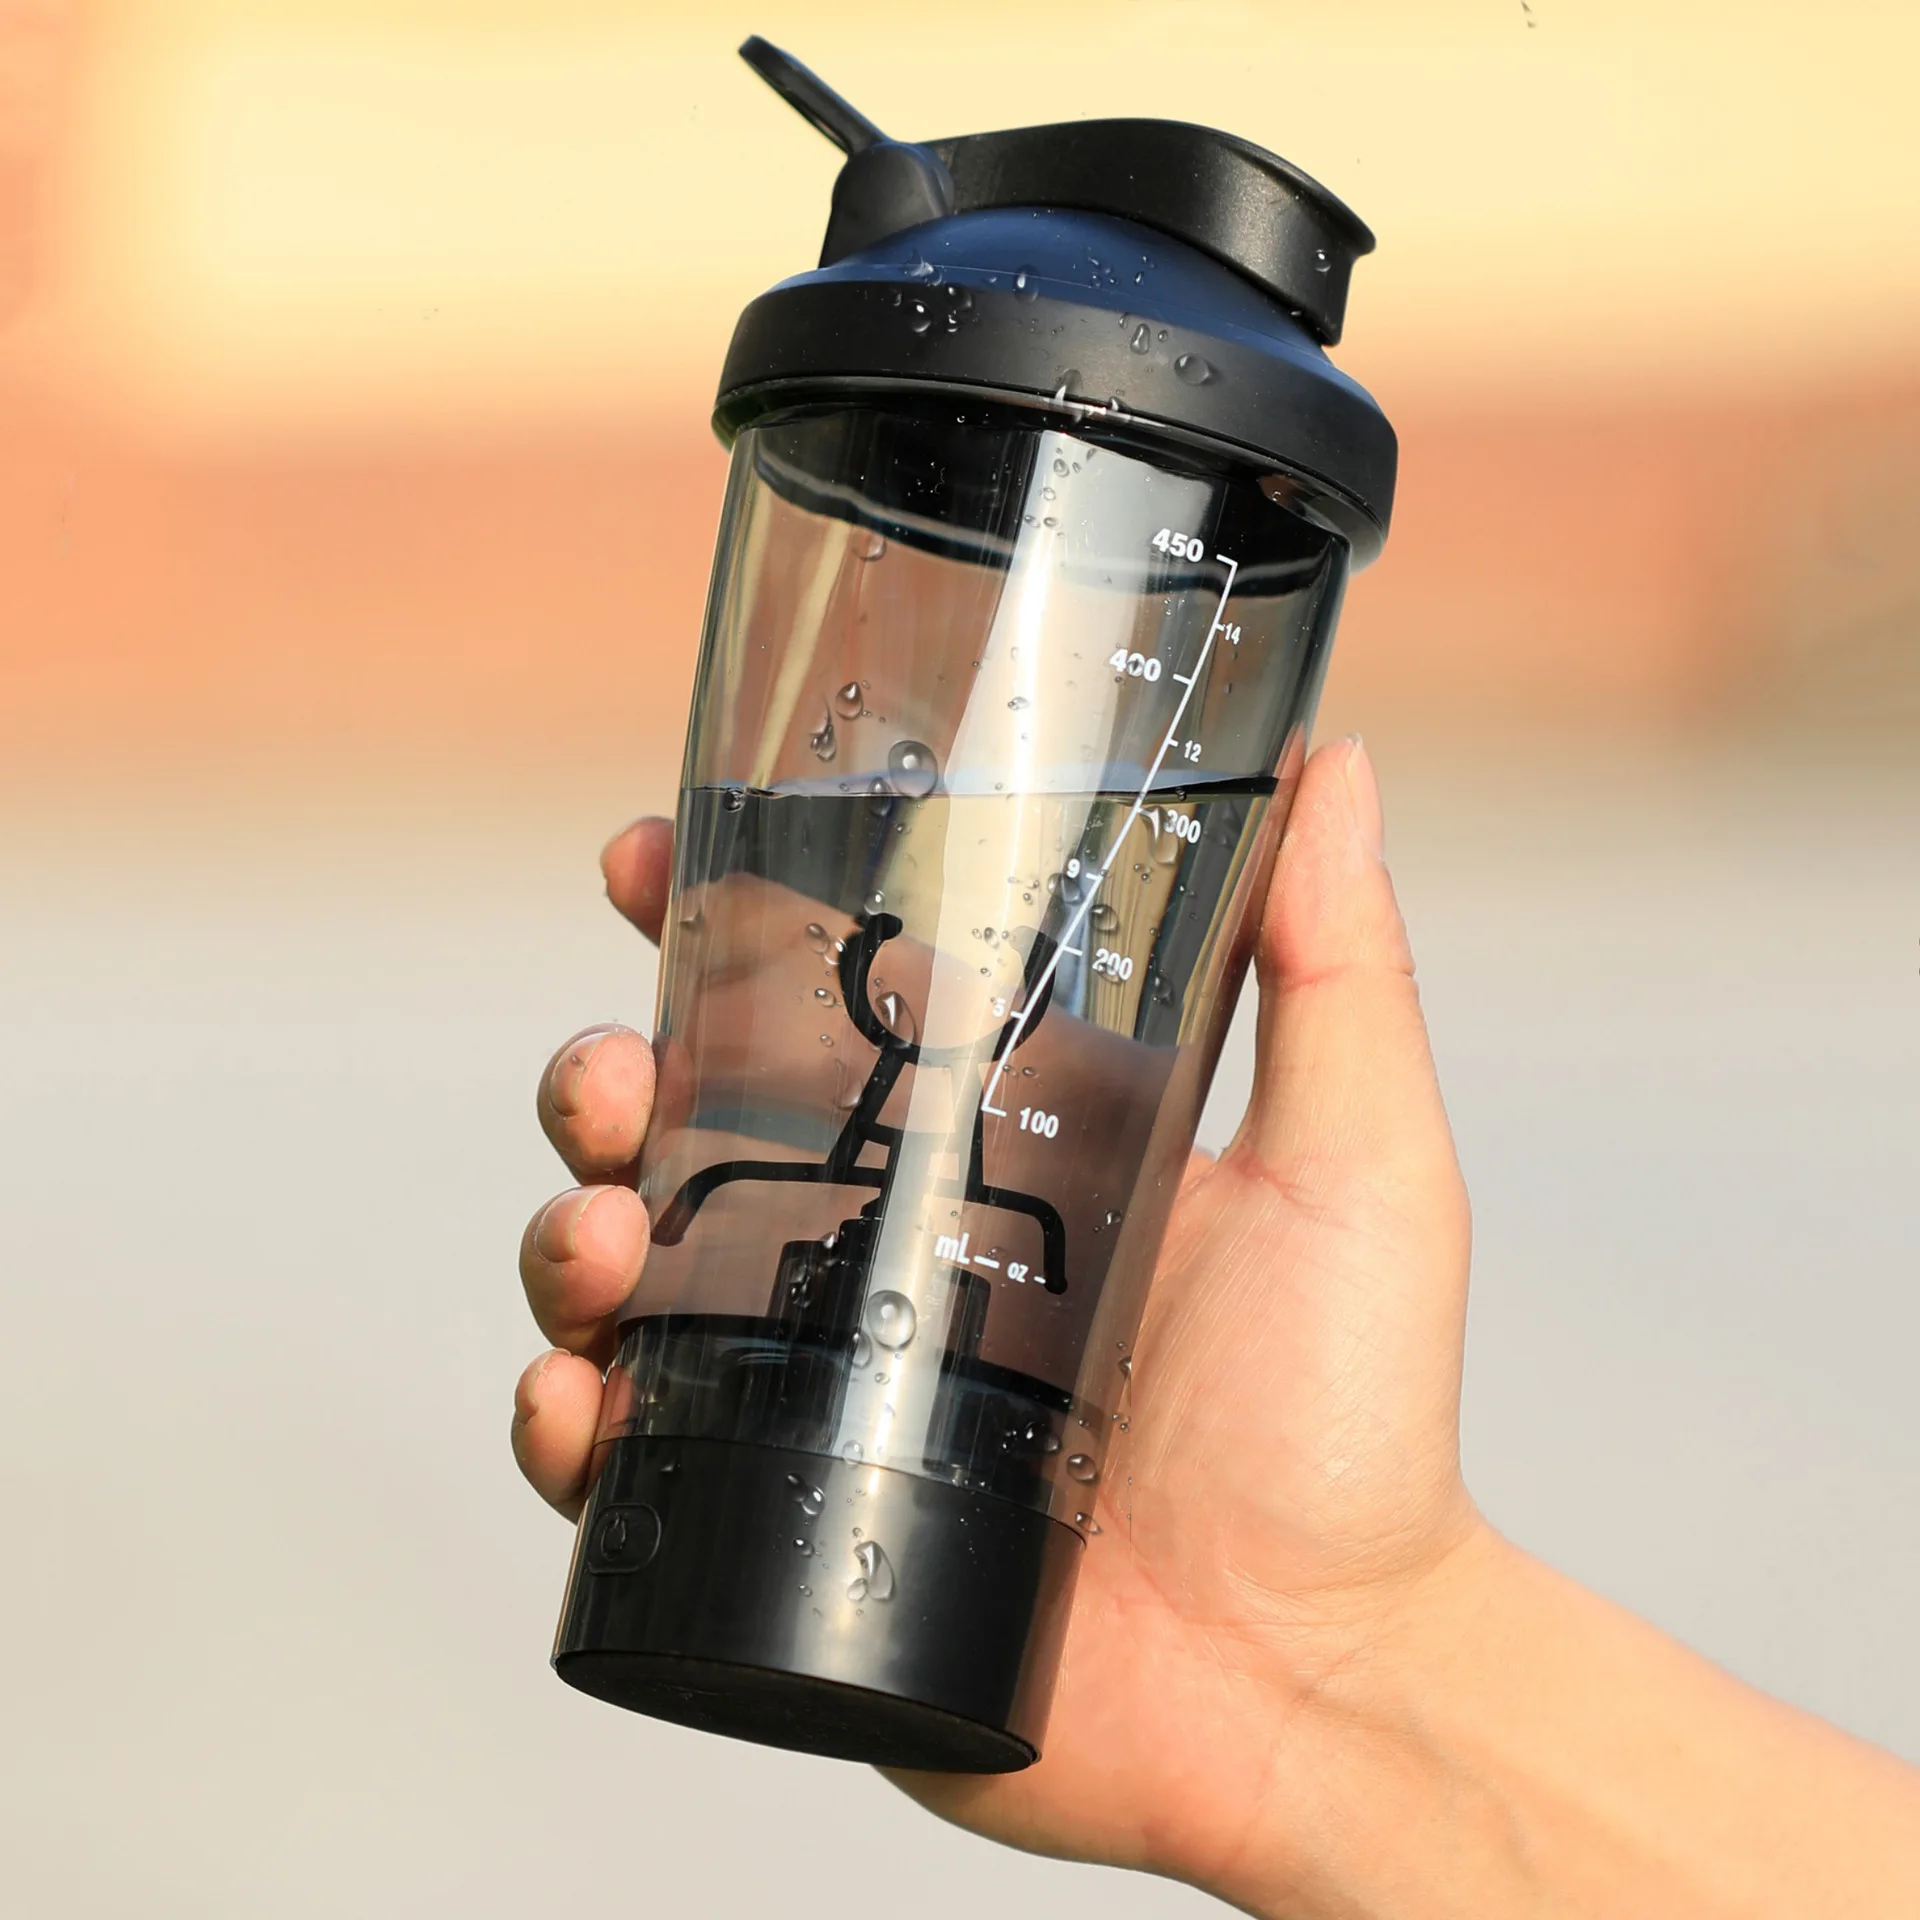 USB Rechargeable Electric Mixing Cup Portable Protein Powder Shaker Bottle  Mixer Shaker Bottle Protein Shaker Protein Cup Shaker